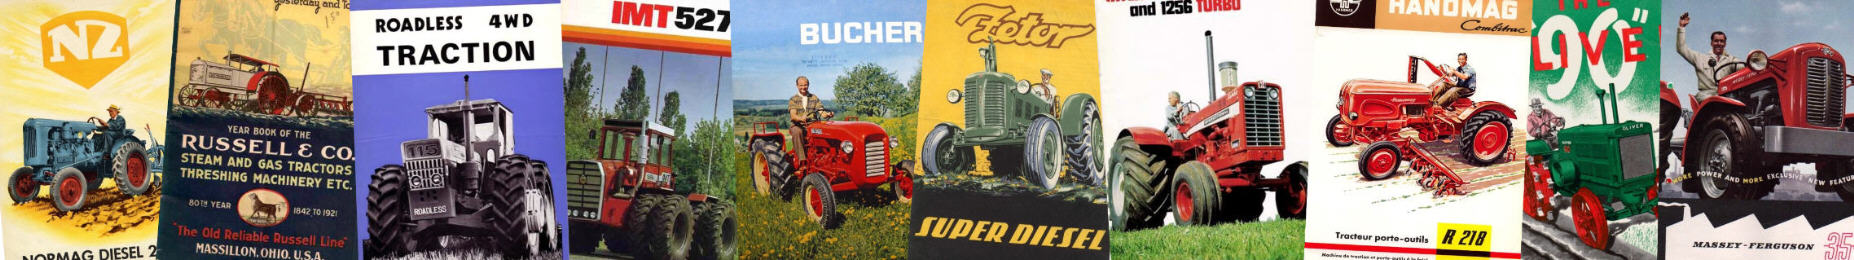 Hanomag R 22 R22 Tractor Diesel Tractor Poster Poster Picture Sign Deco Advertising 